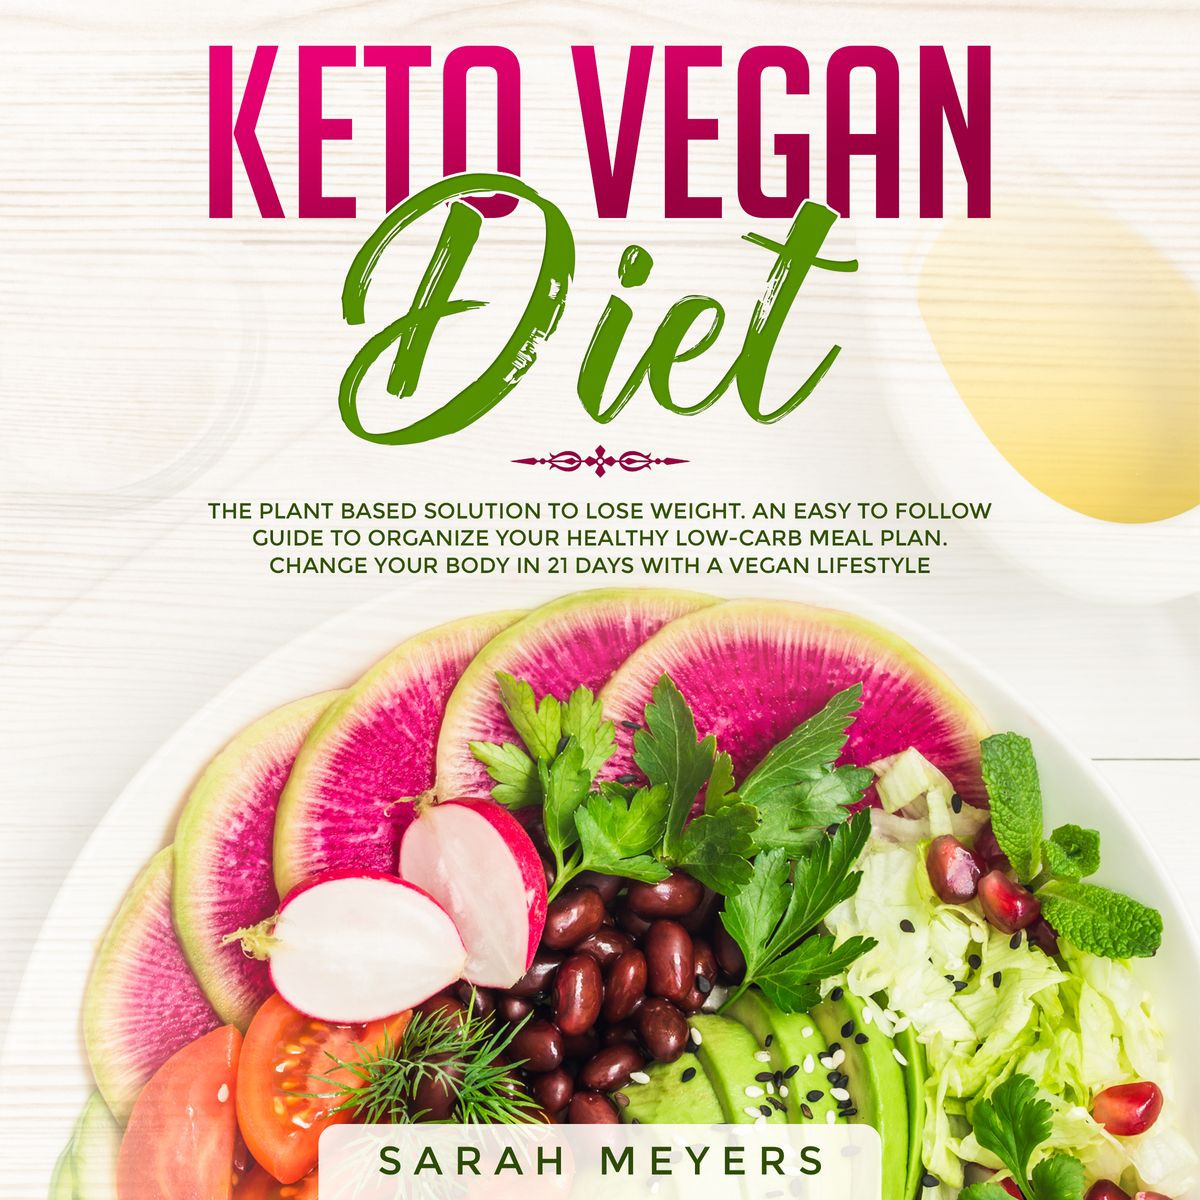 Vegan Keto Meal Plan Low Carb
 Keto Vegan Diet The Plant Based Solution to Lose Weight